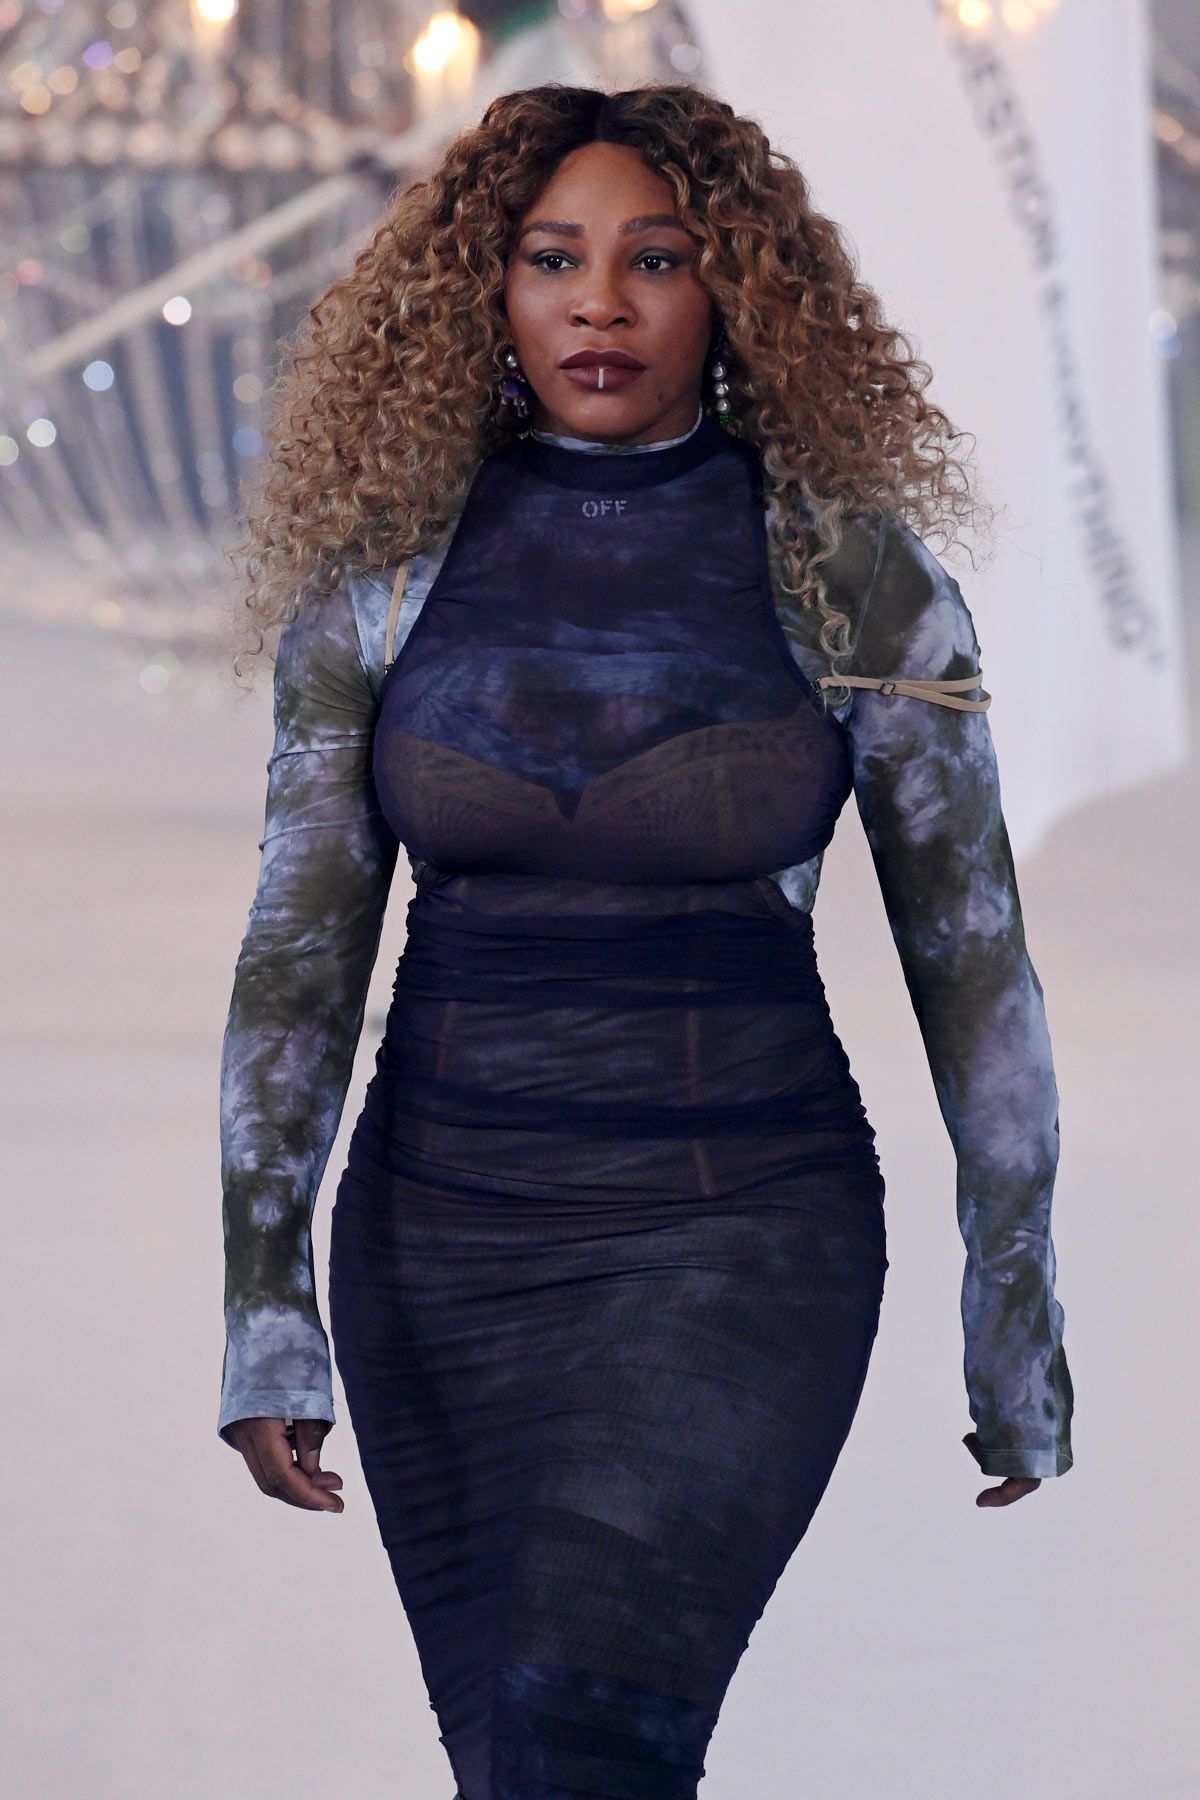 Serena Williams, Cindy Crawford, and More Walk in Off-White